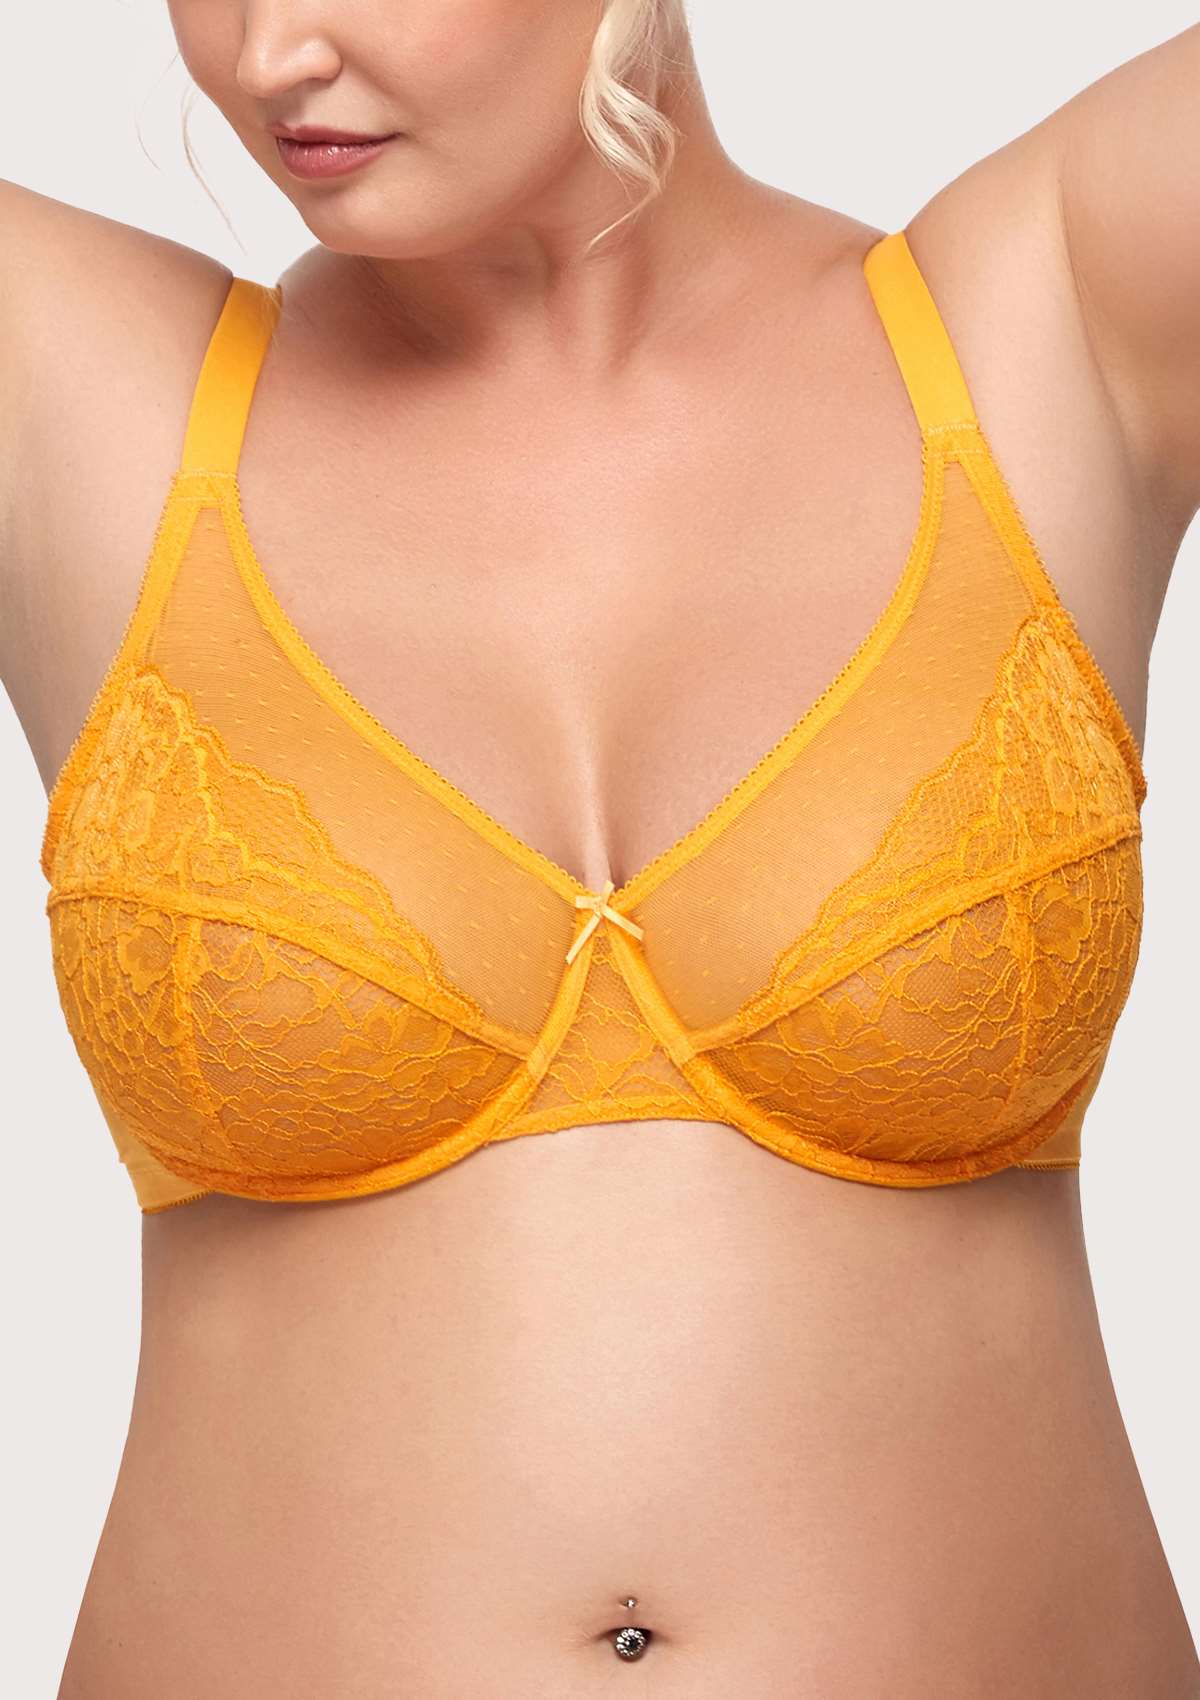 HSIA Enchante Bra And Panty Sets: Unpadded Bra With Back Support - Cadmium Yellow / 44 / DDD/F